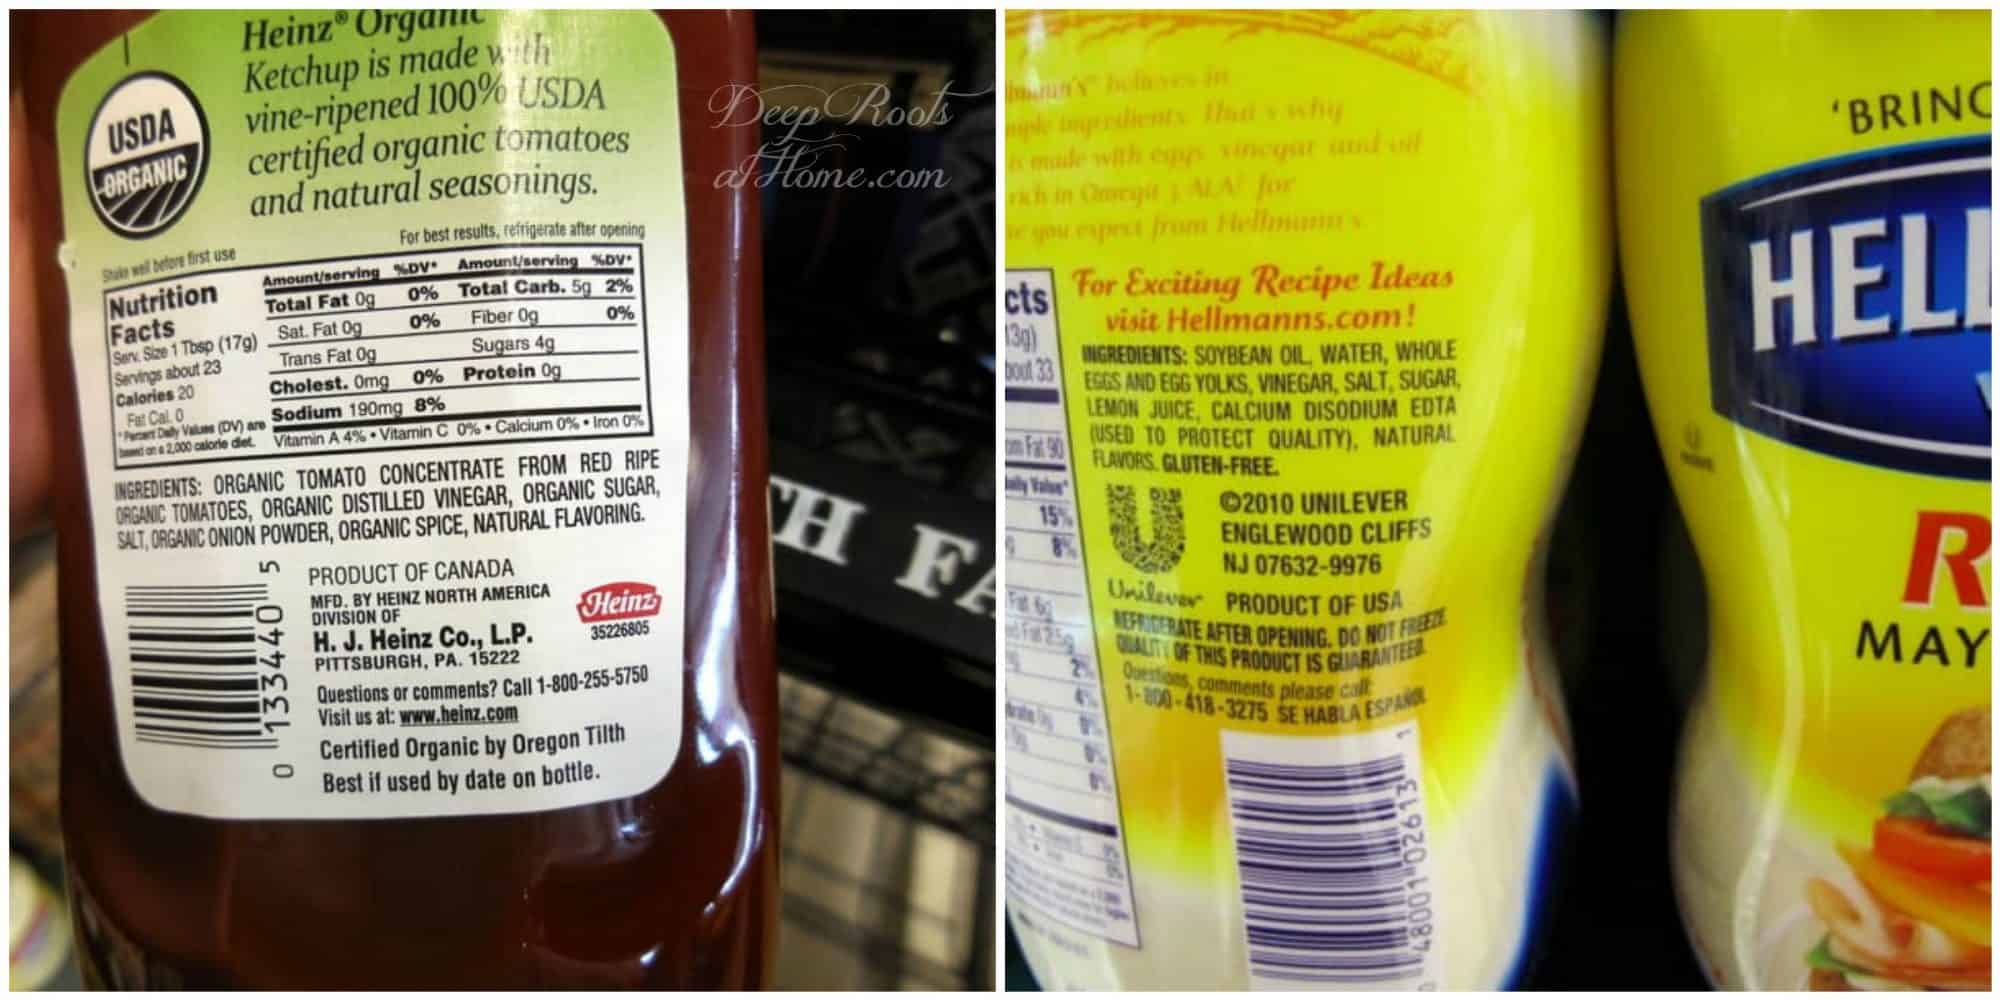 Addictive Flavors & How the Food Giants Have Us Hooked. Heinz organic ketchup